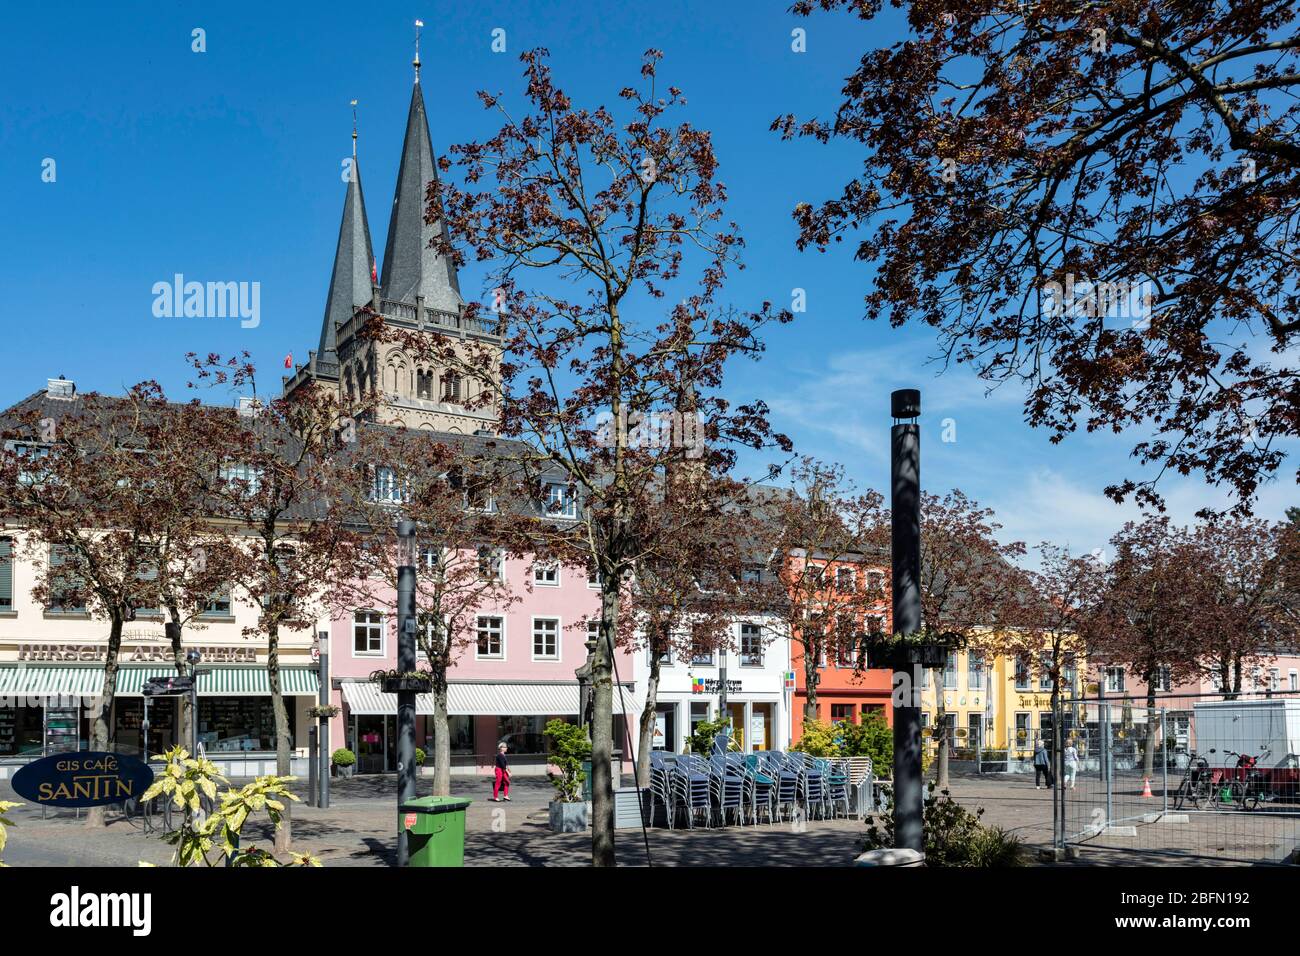 Markt Xanten with St. Viktor's Provost Church in the background Stock Photo